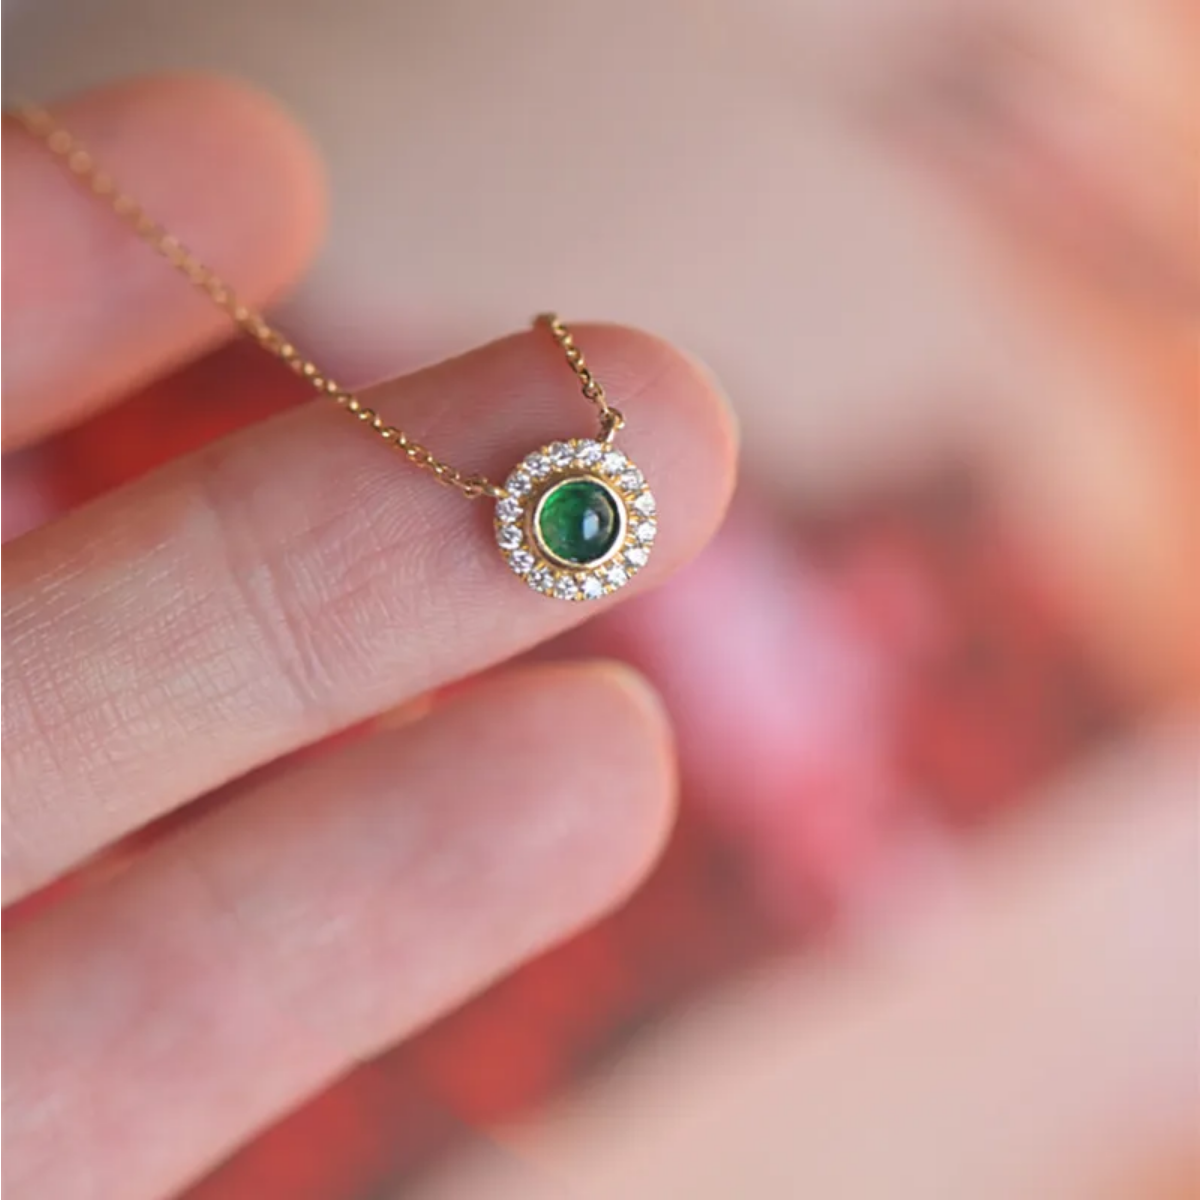 Small Round Pendant Necklace with Green Imitation Opal Stone F